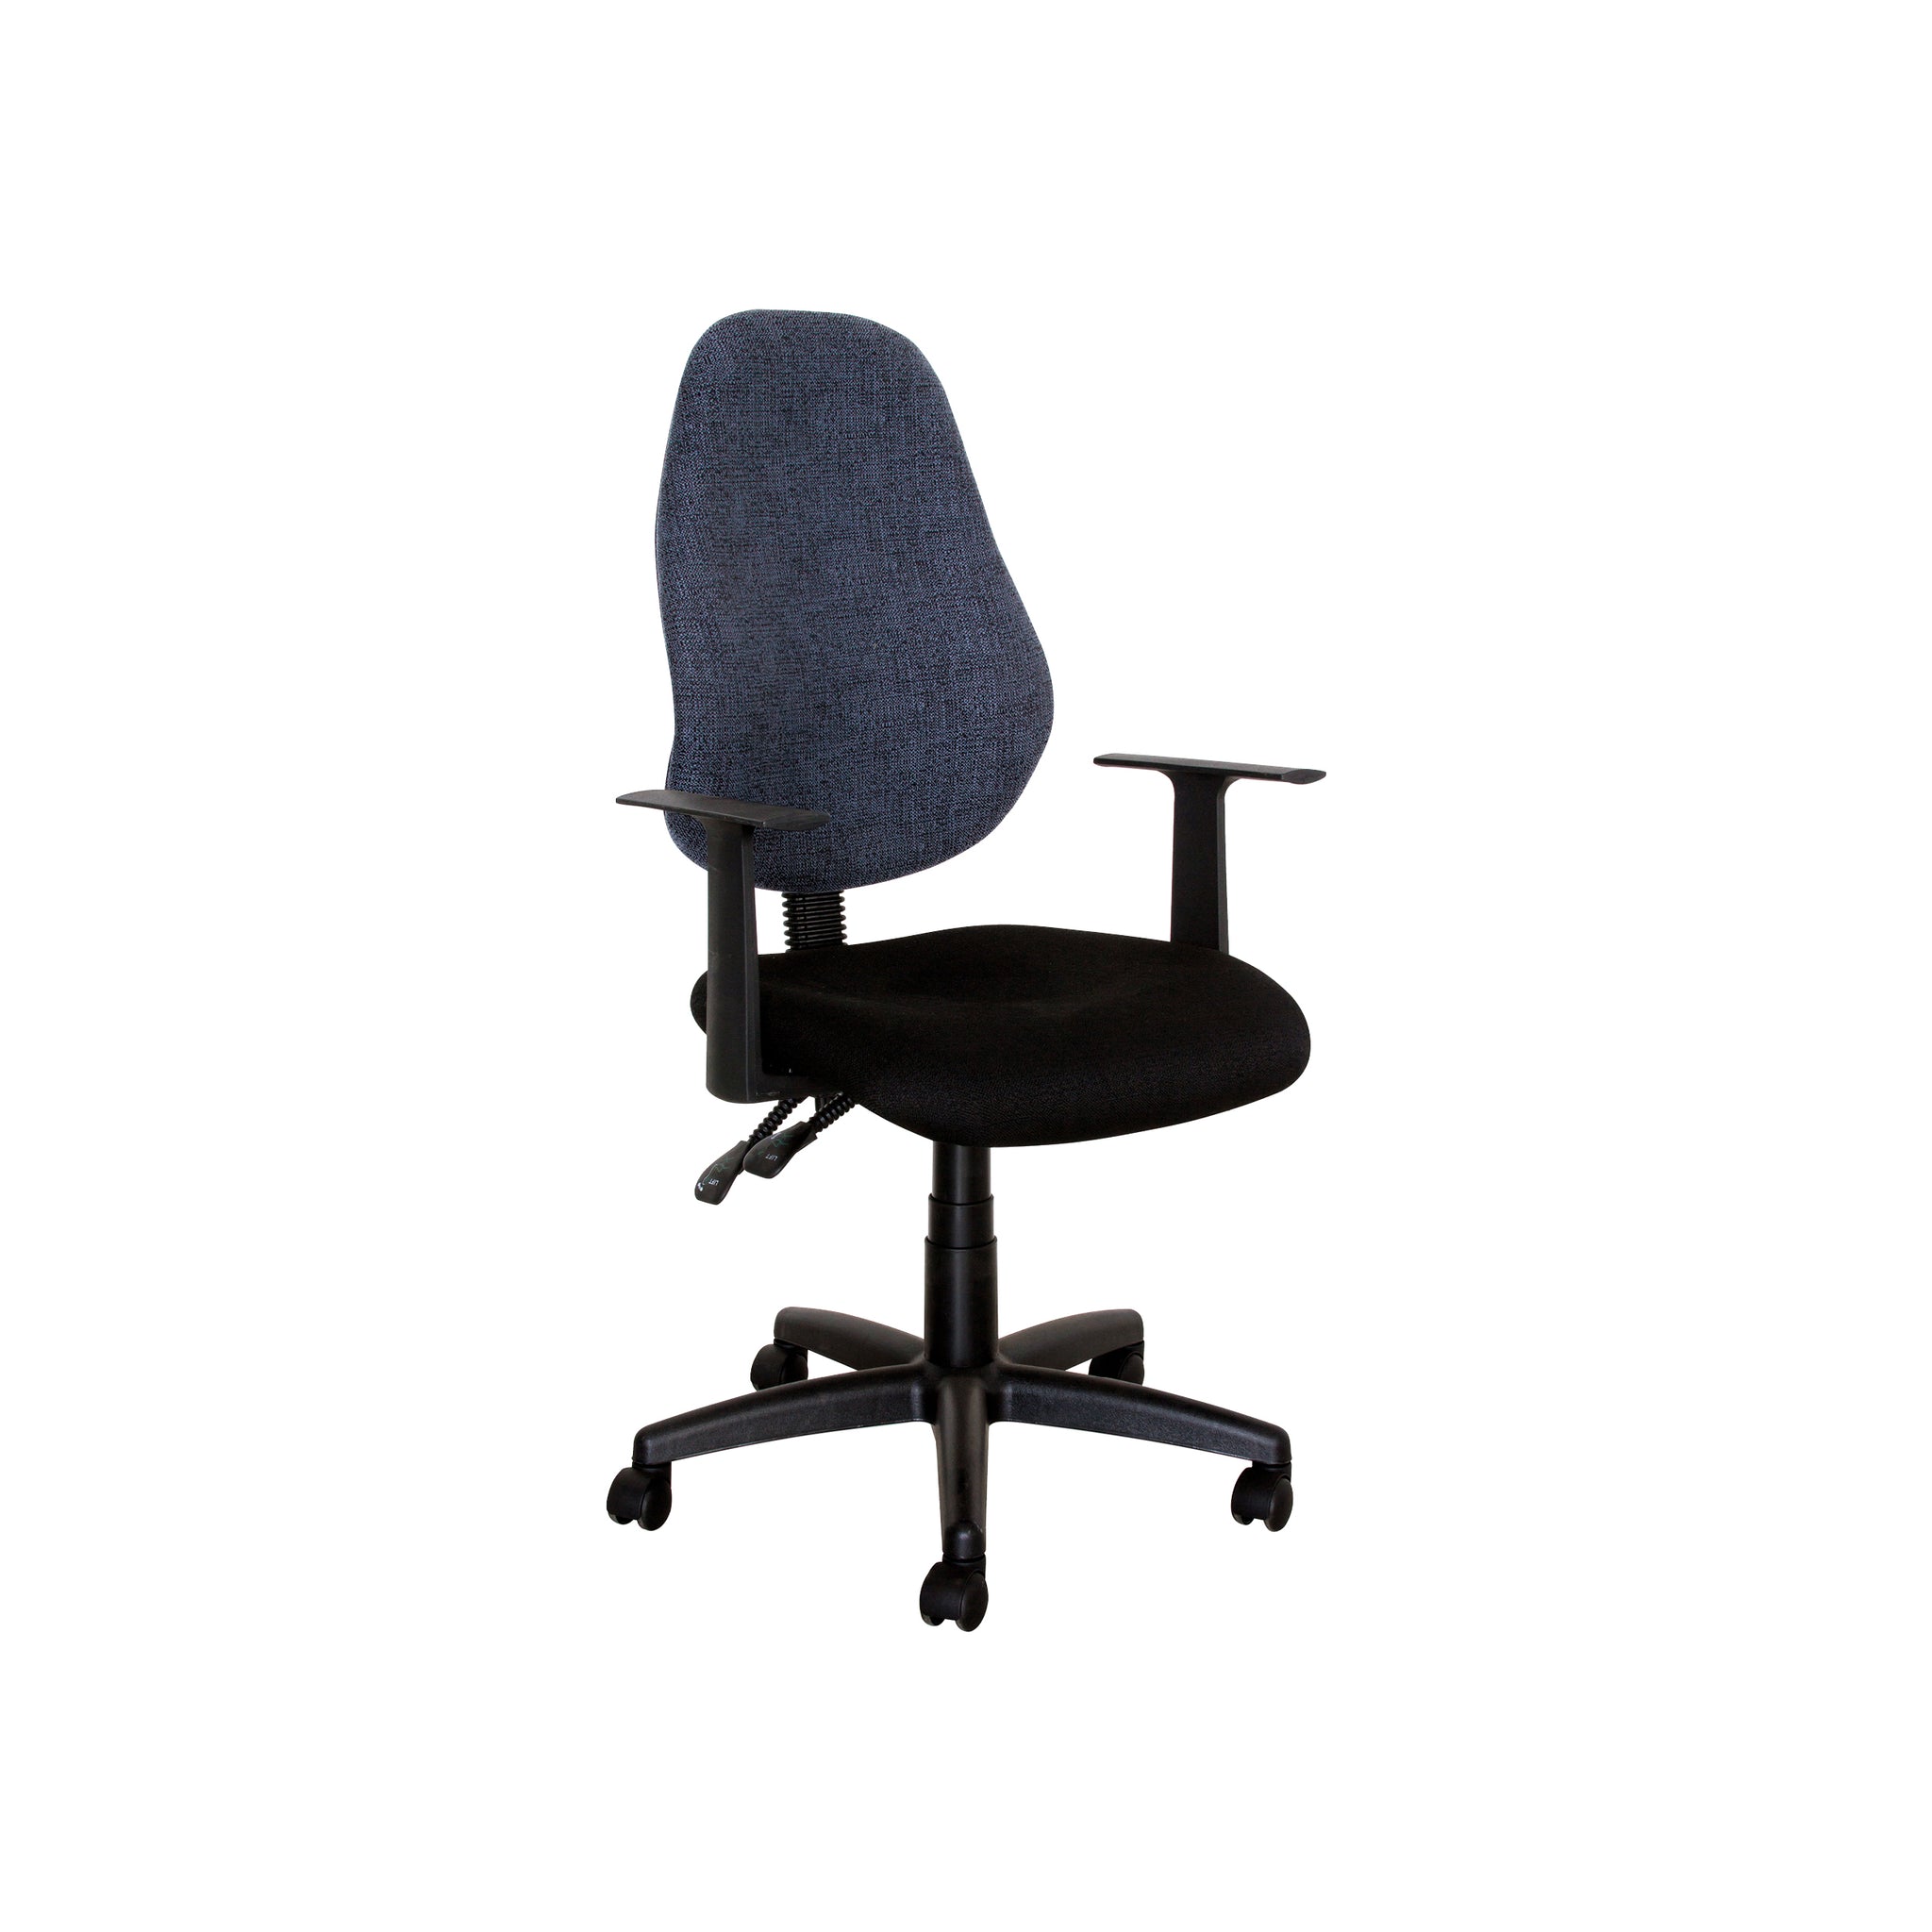 Hedcor Lucea operator with arm office chair